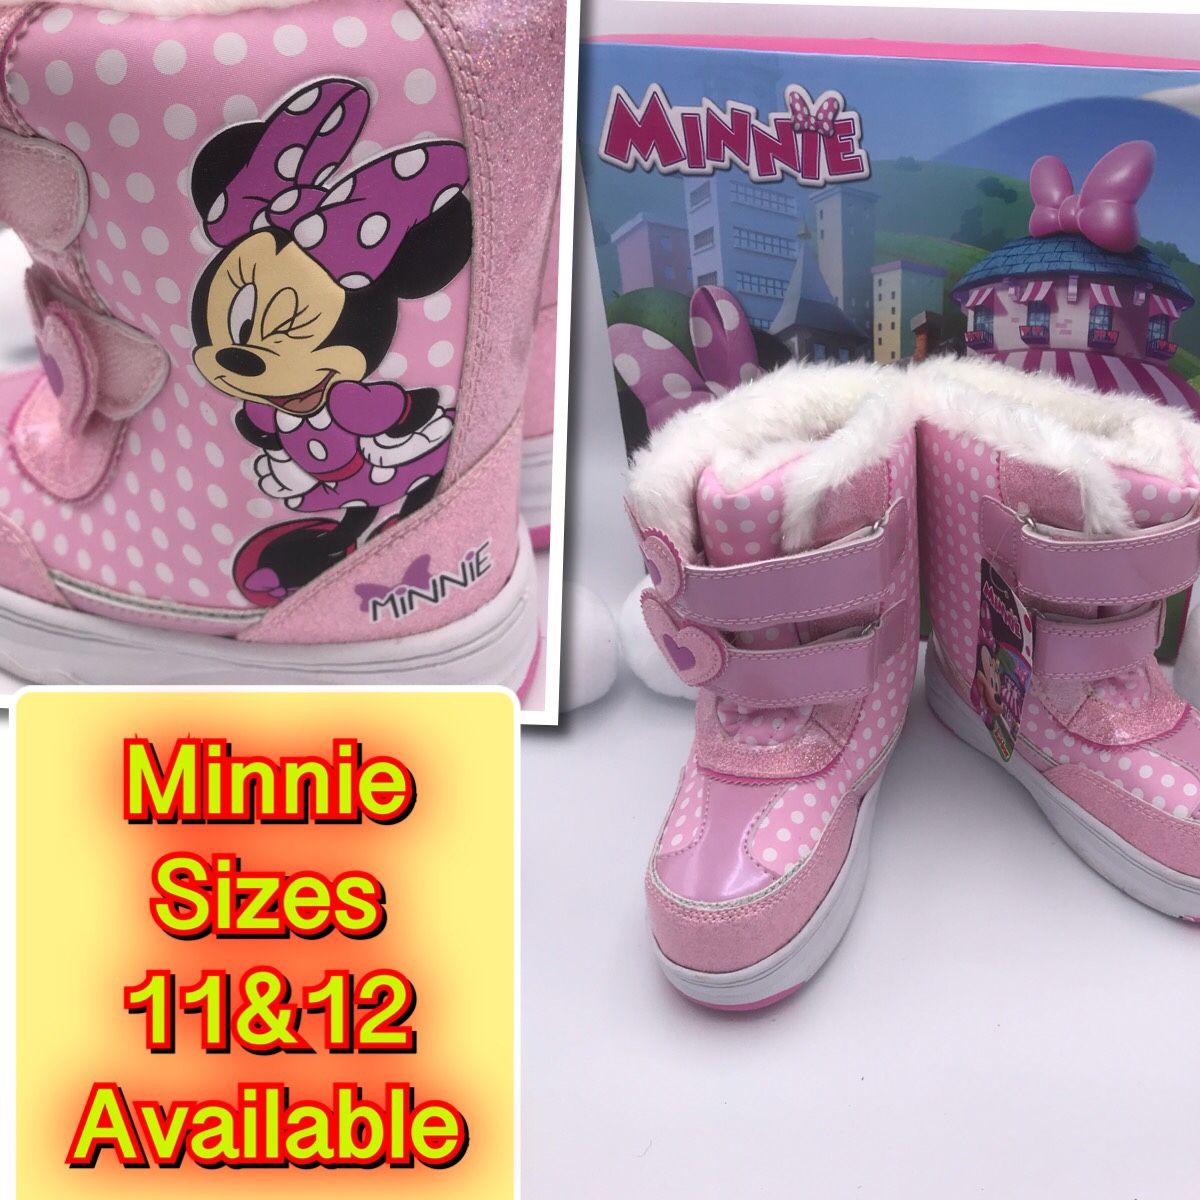 Brand New Minnie Mouse Waterproof winter snow and rain boots Sizes 11 & 12 Available